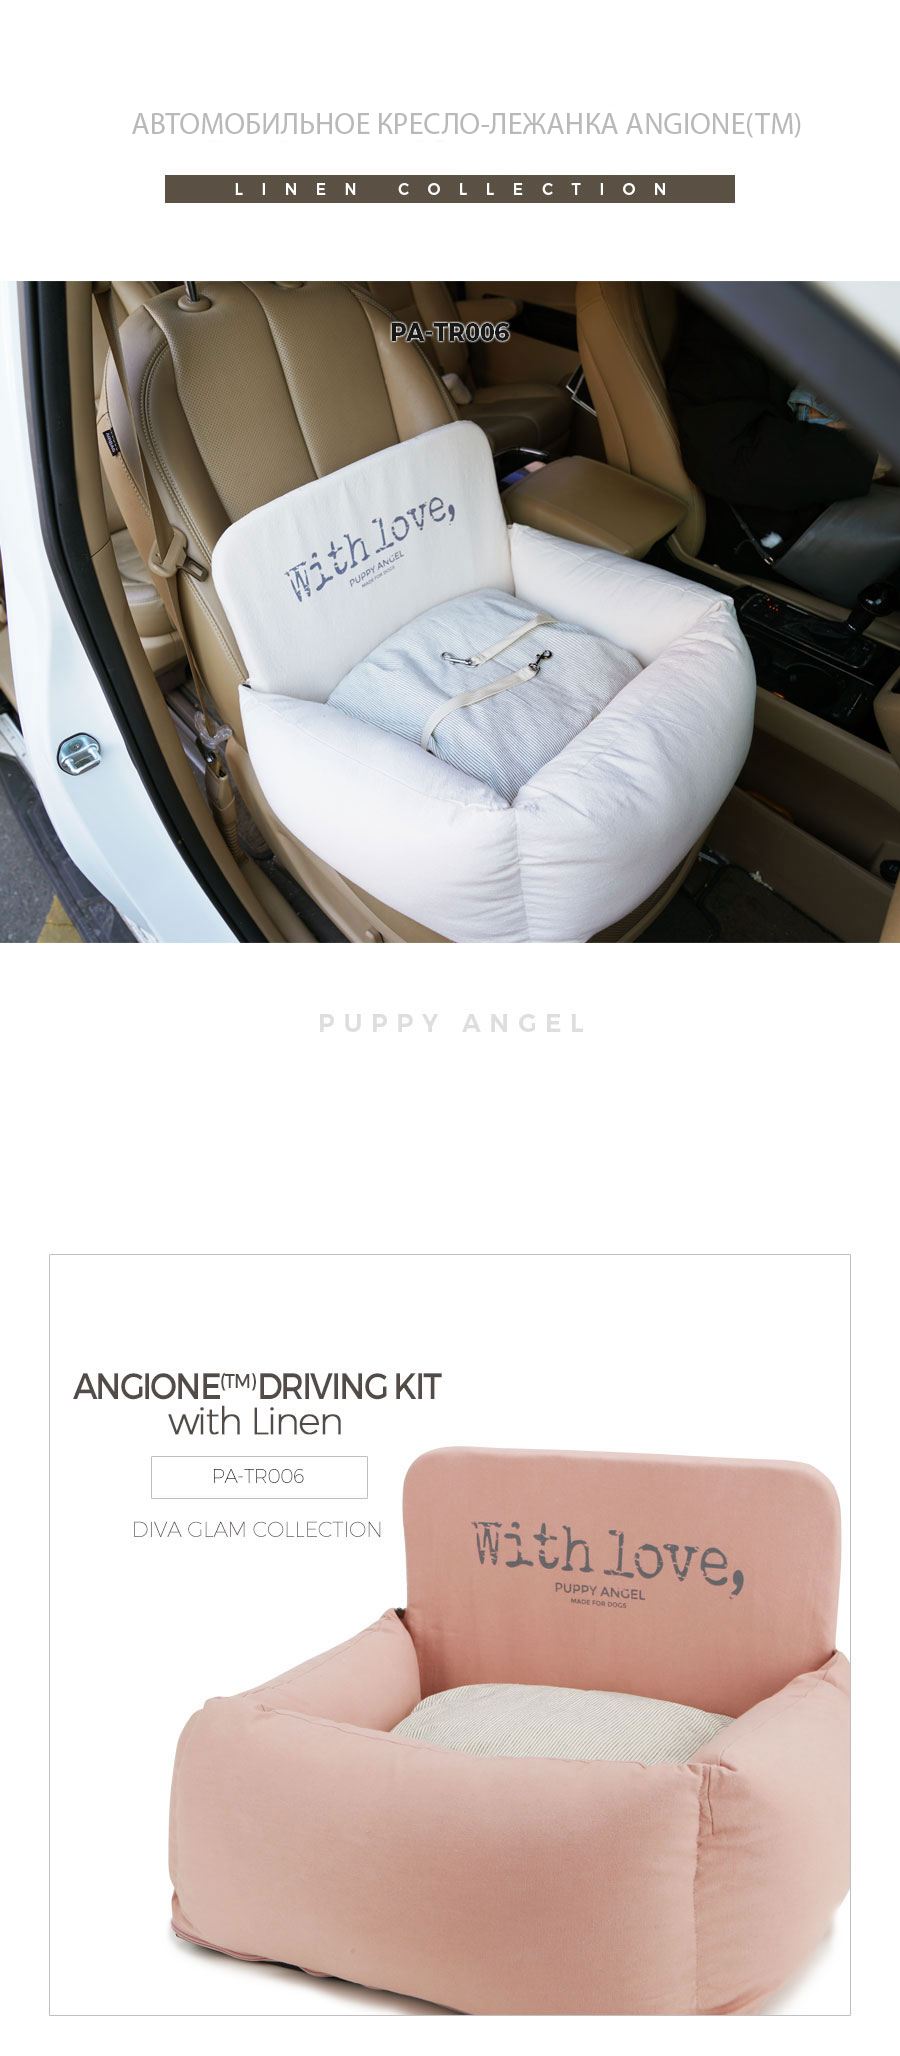 ANGIONE(TM) Driving Kit with Linen